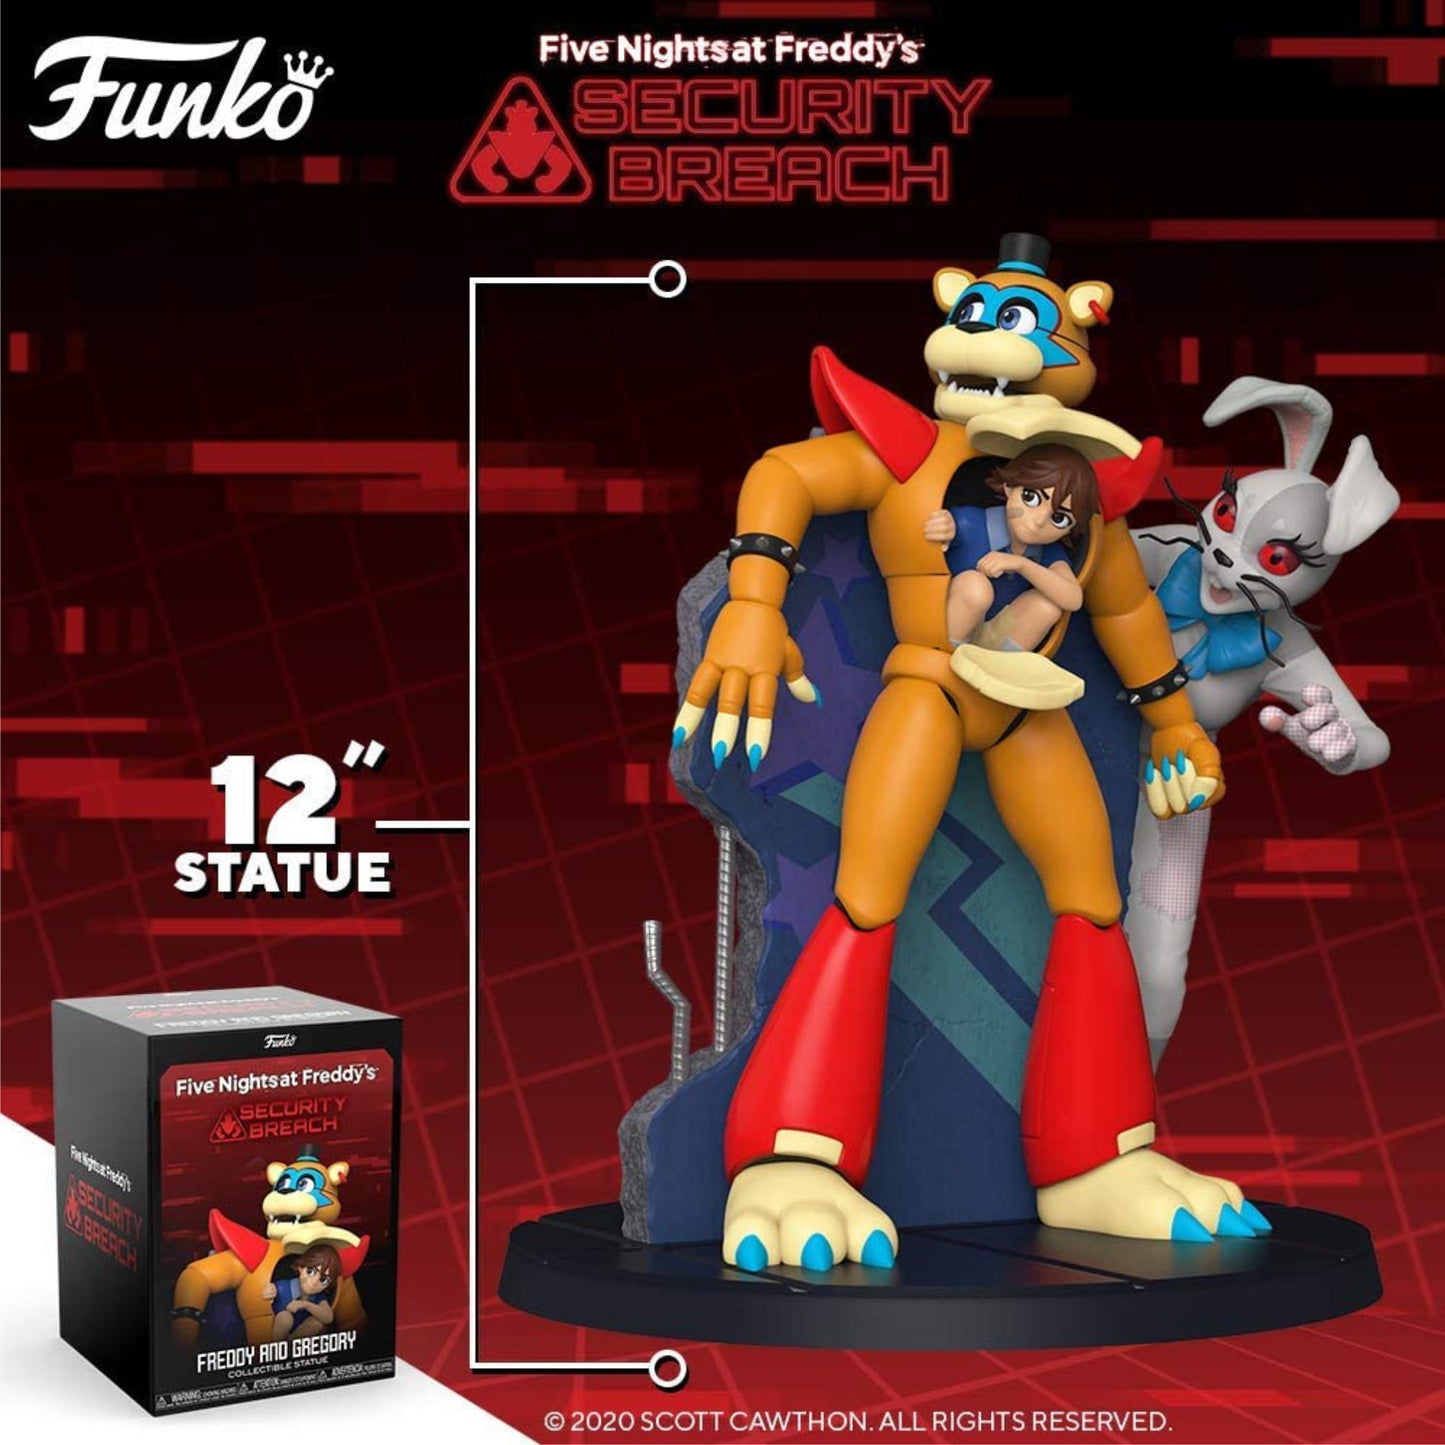 Five Nights at Freddy's Security Breach - Freddy and Gregory 12" Statue